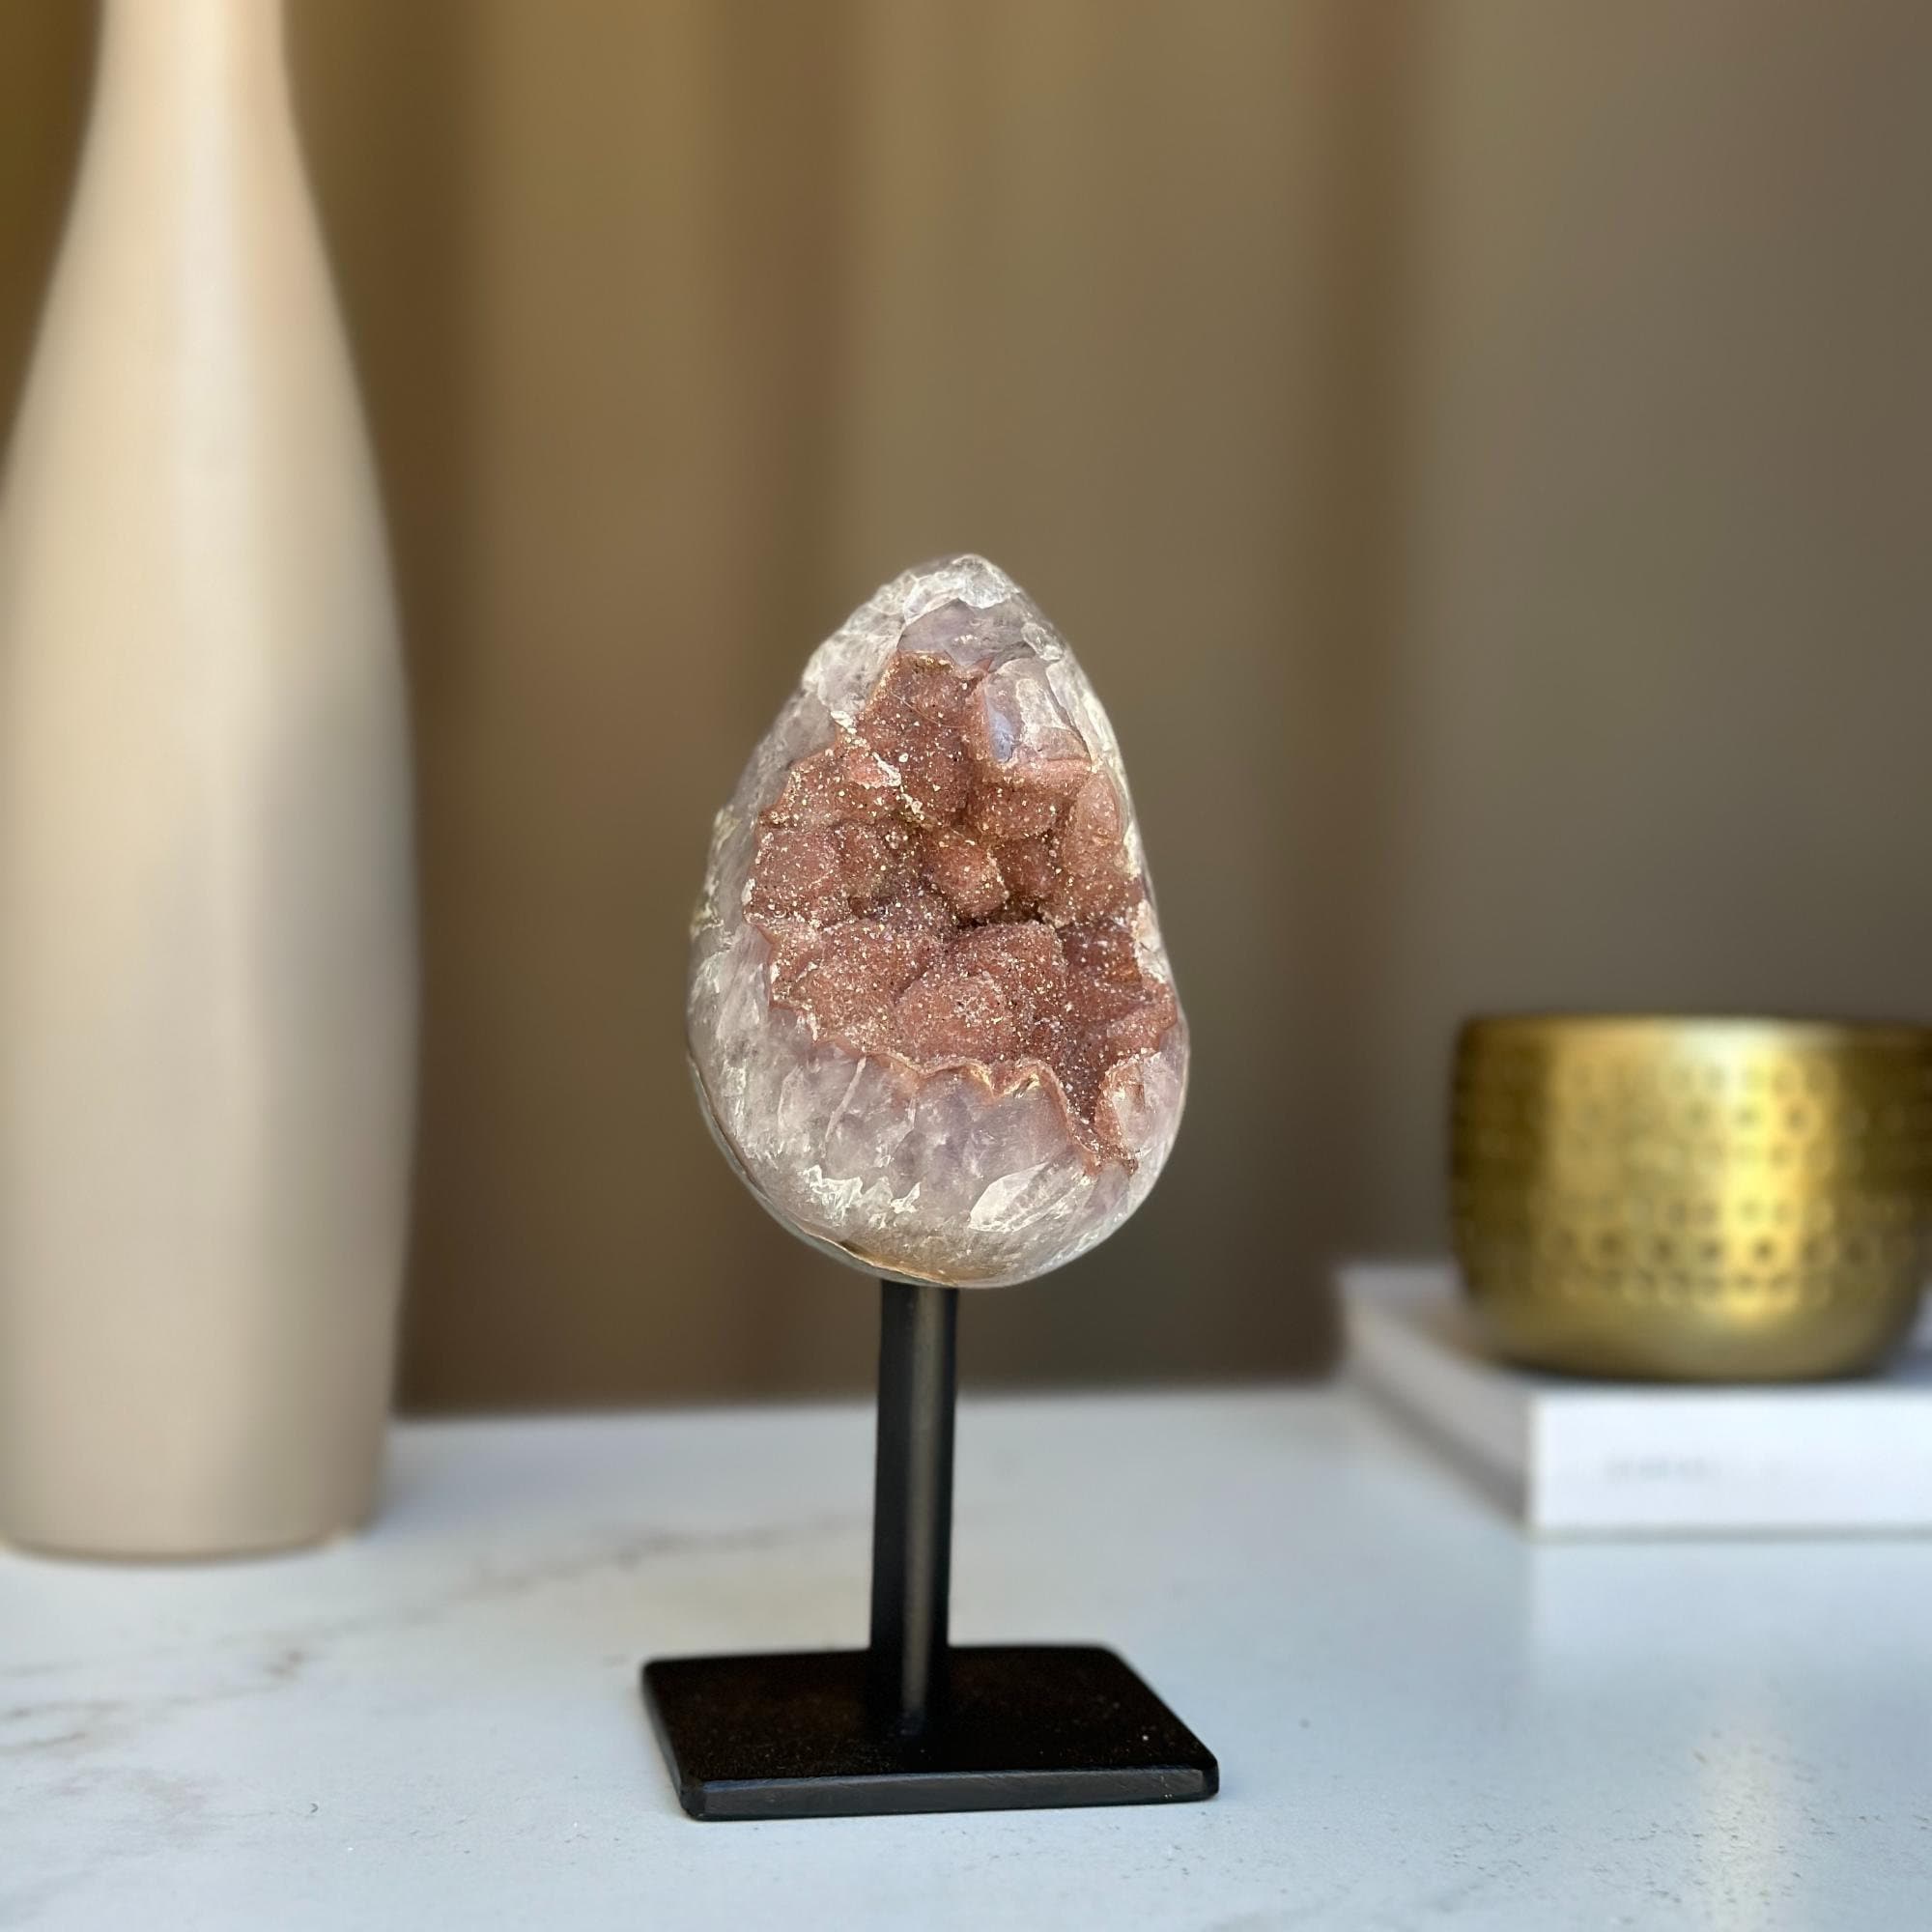 Egg Shaped Crystal on Stand, Agate and Pink Amethyst, Rare Unique Jasper and Agate Crystal on Metal Stand, Elevate your home decor